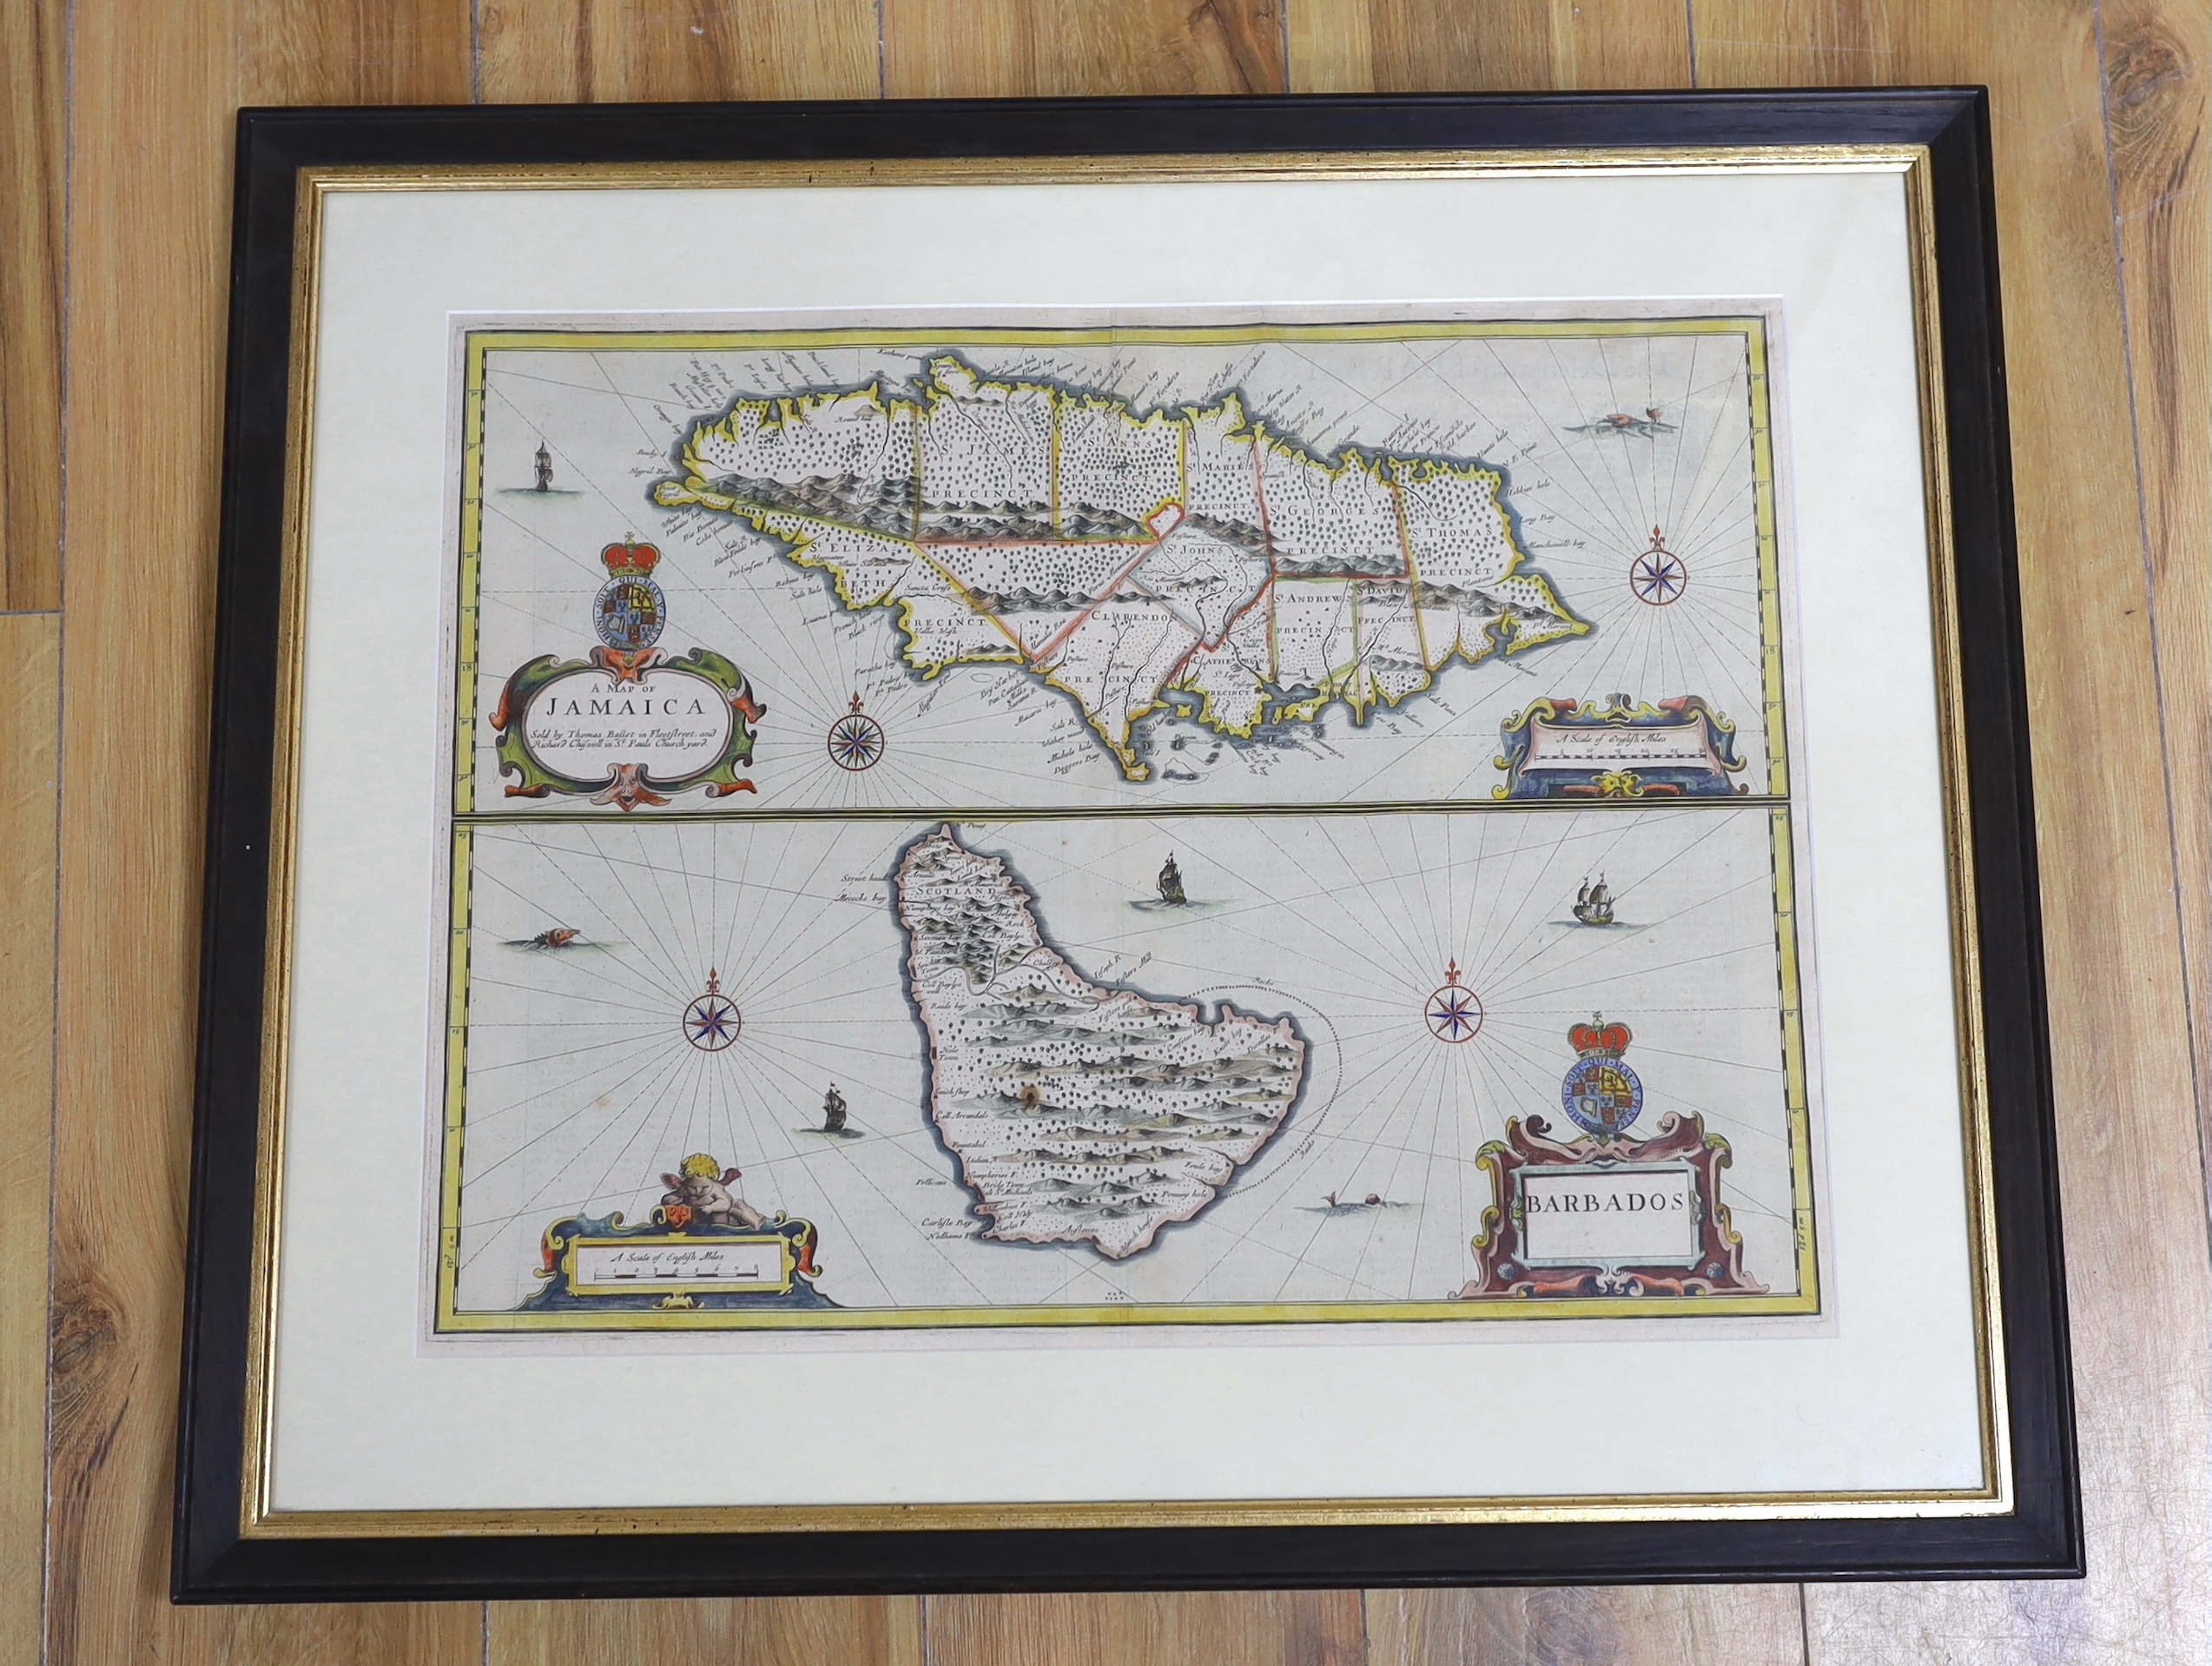 John Speed (1552-1629), Map of Jamaica and Barbados, hand coloured engraving, sold by Thomas Bassett and Richard Chiswell, 39 x 51cm